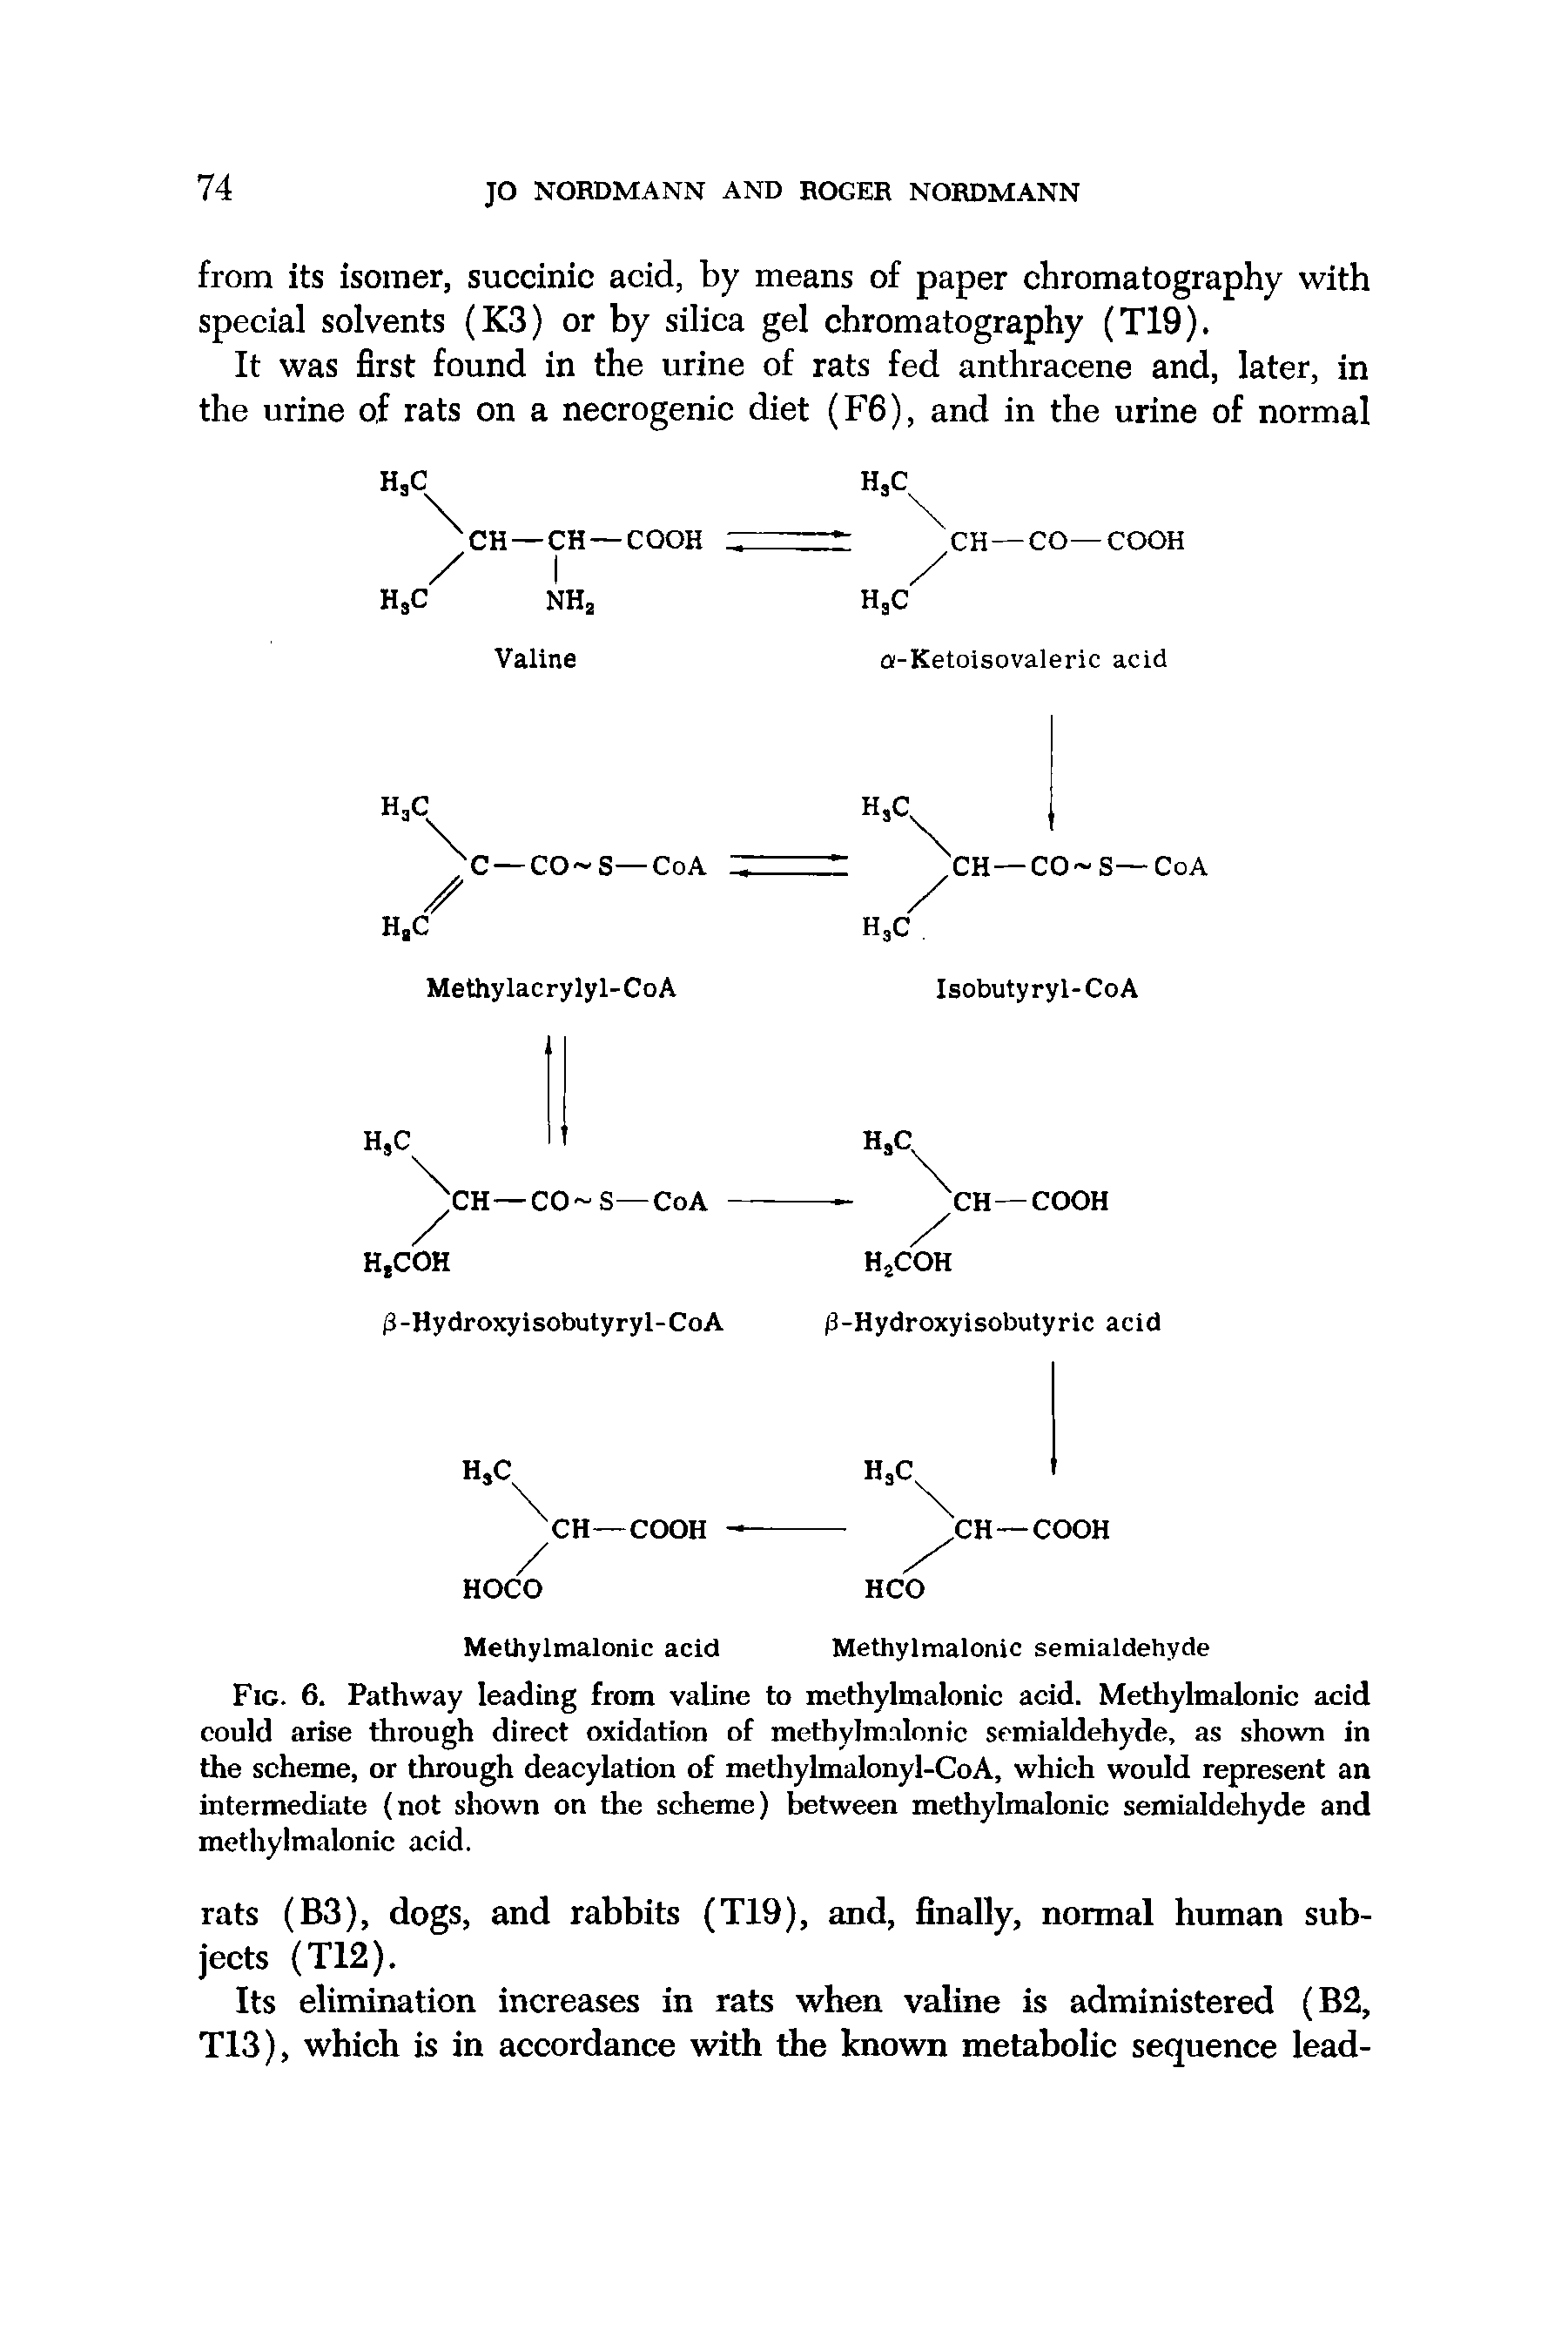 Fig. 6. Pathway leading from valine to methylmalonic acid. Metliylmalonic acid could arise through direct oxidation of methylmalonic semialdehyde, as shown in the scheme, or through deacylation of methylmalonyl-CoA, which would represent an intermediate (not shown on the scheme) between methylmalonic semialdehyde and methylmalonic acid.